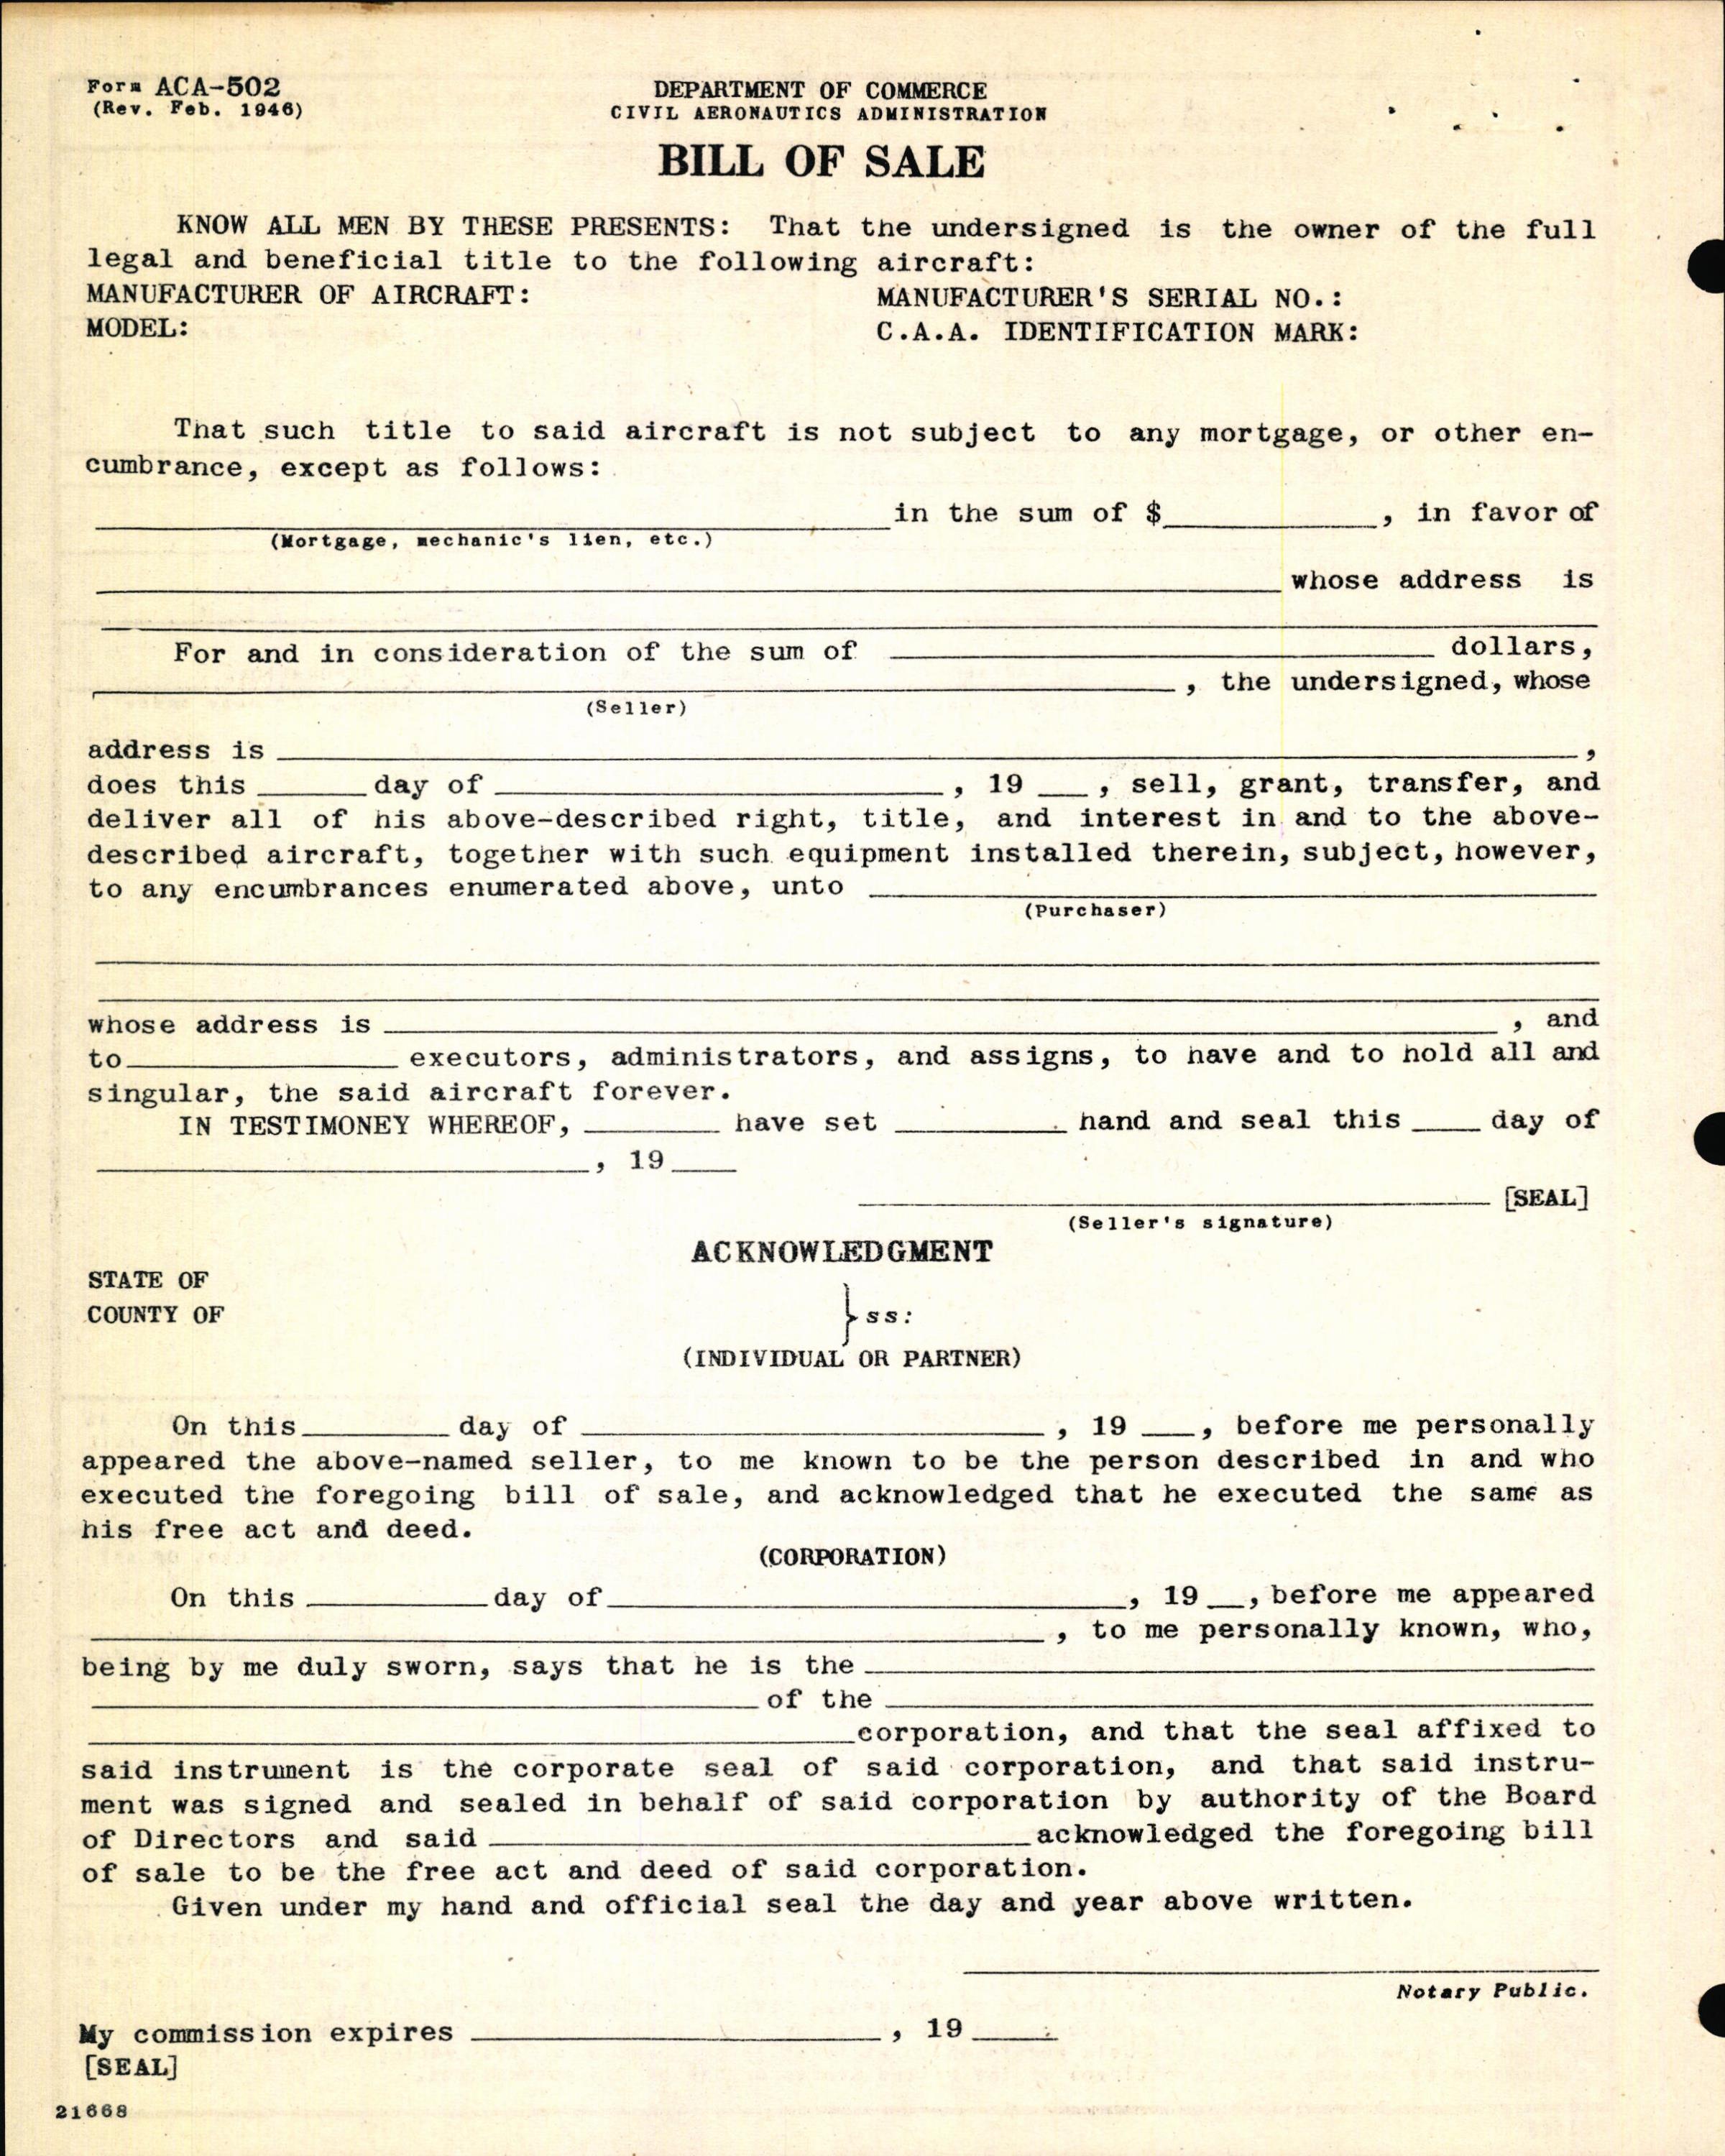 Sample page 4 from AirCorps Library document: Technical Information for Serial Number 1224